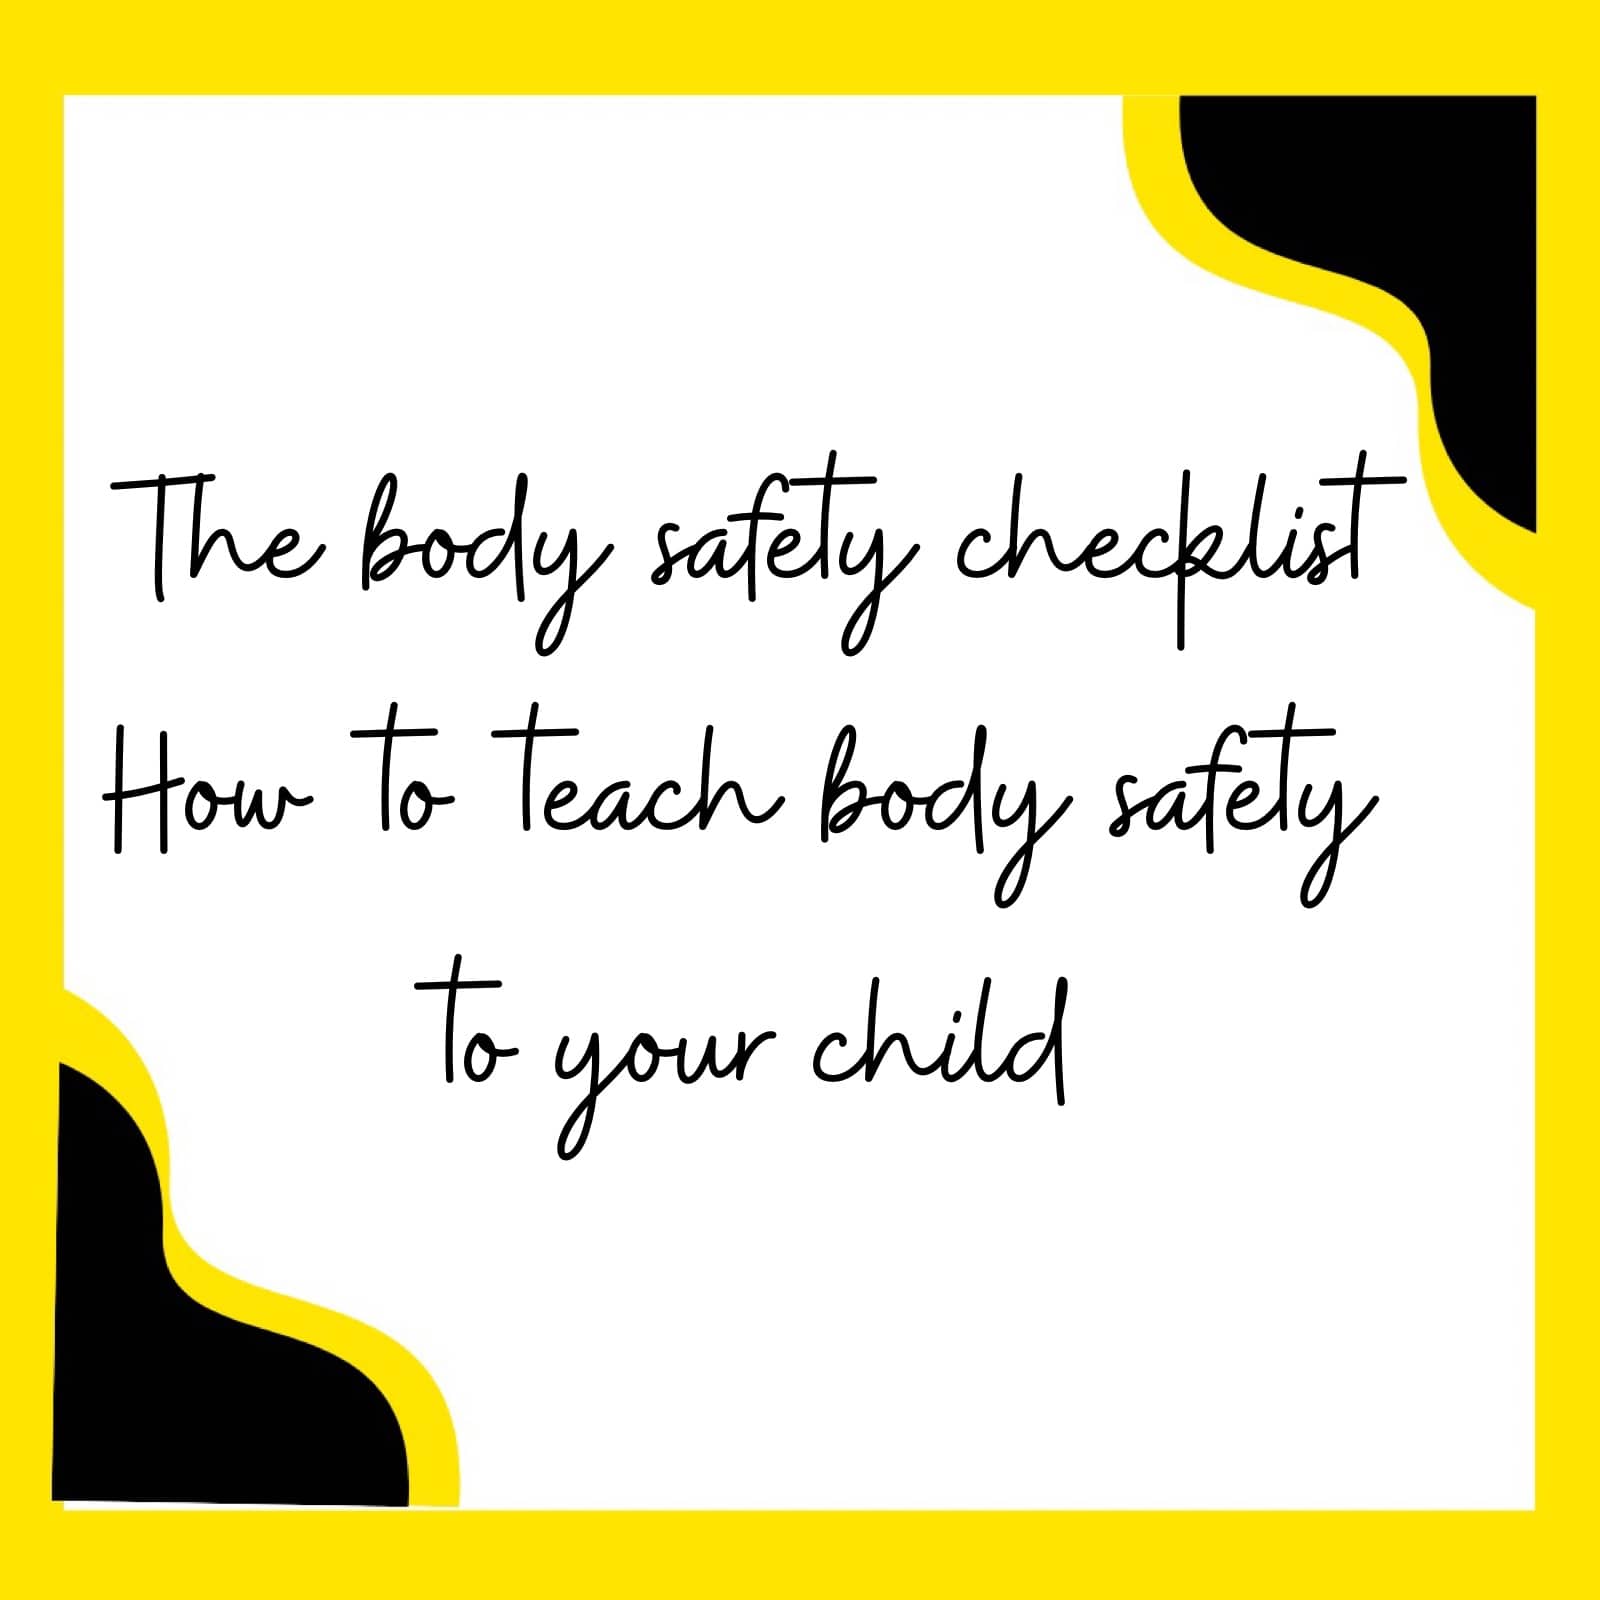 The body safety checklist how to teach body safety to your child